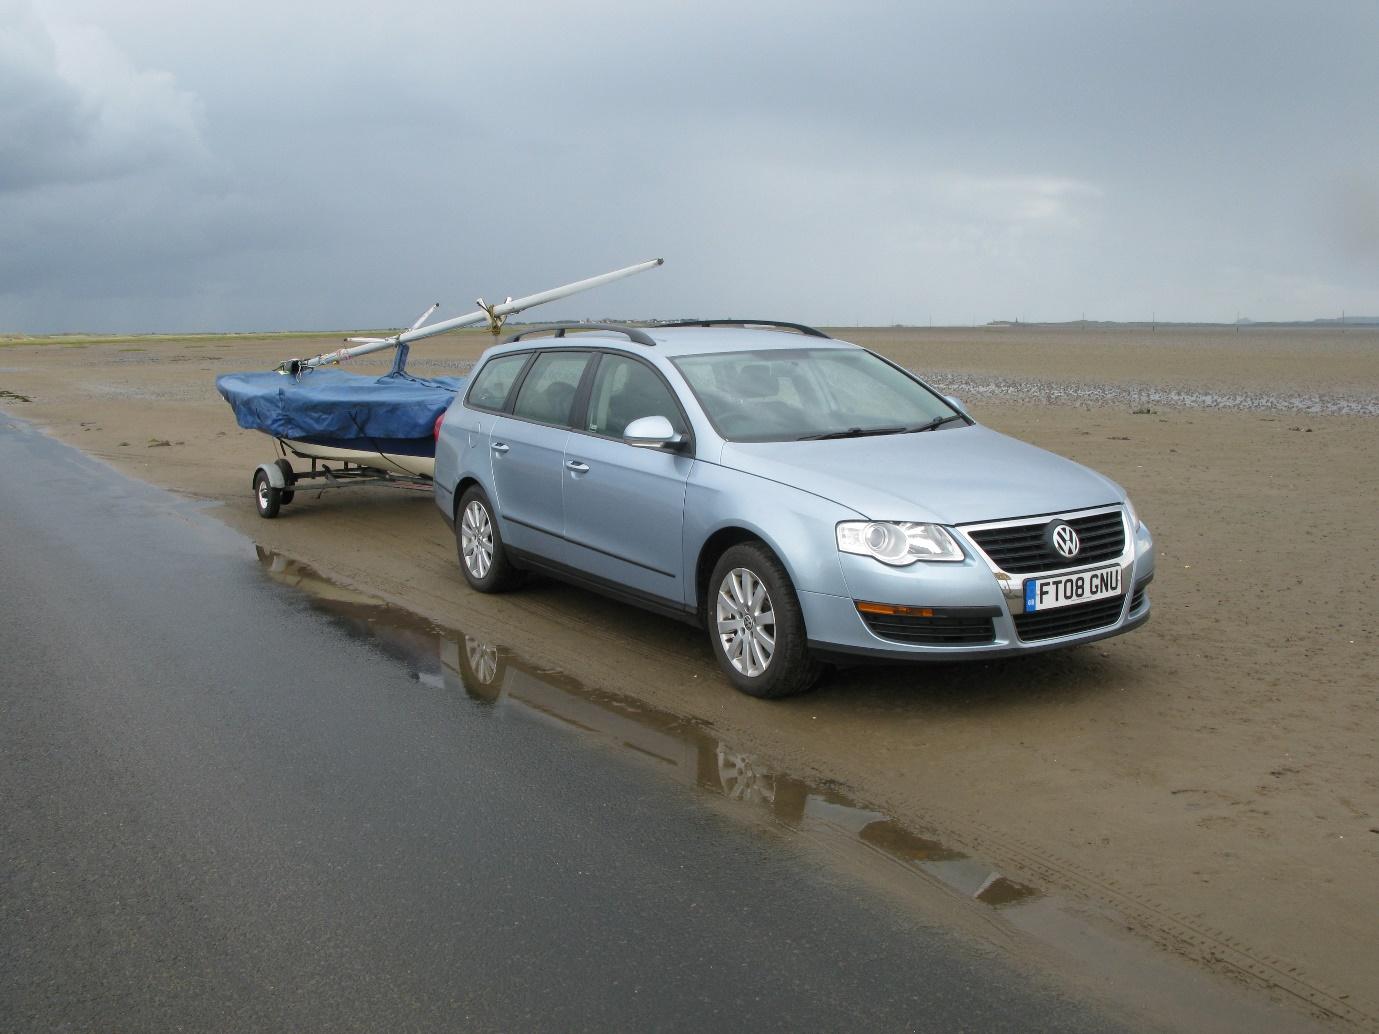 Simon's Wanderer dinghy being towed on the causeway